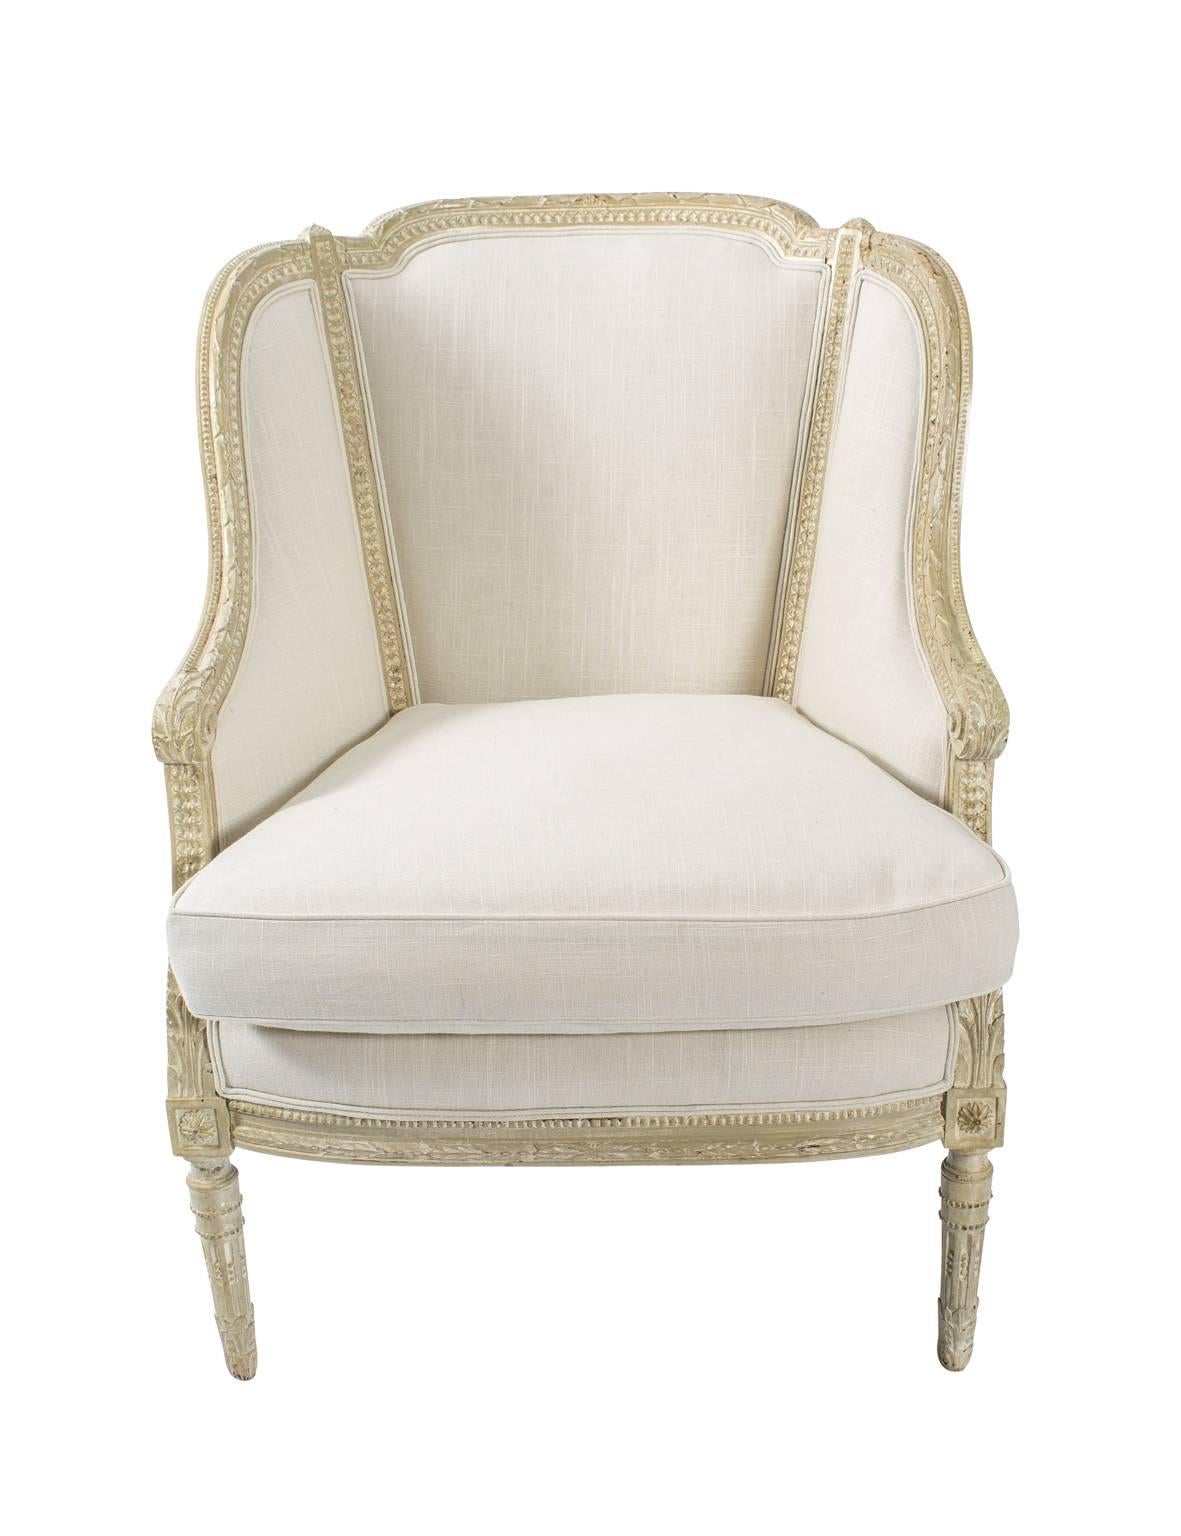 Pair of Louis XVI style armchairs upholstered Richard Allen fabric.